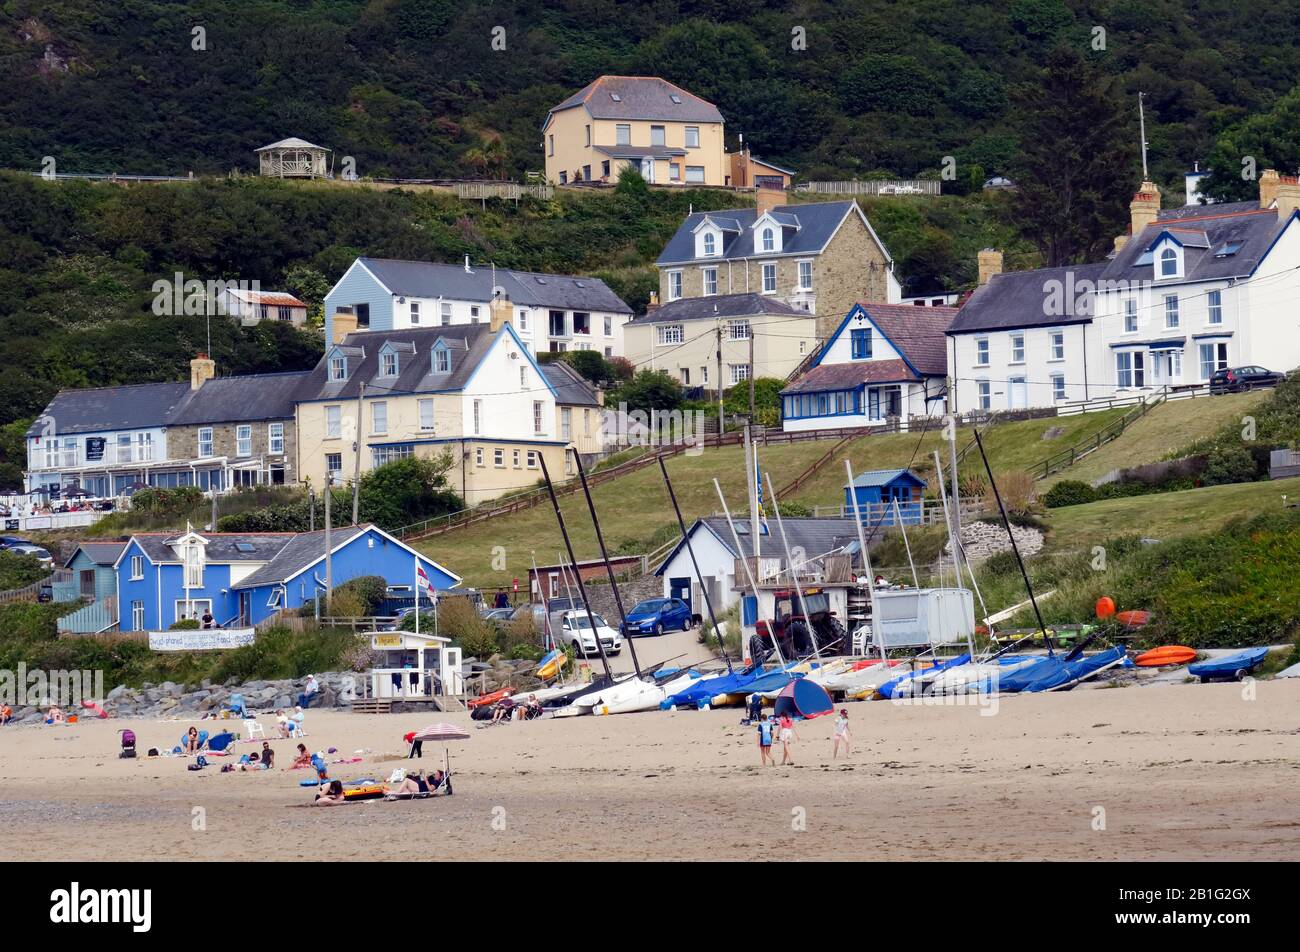 Colour photograph looking from the beach back towards the houses and village of the popular seaside holiday resort of Tresaith in Cardigan Bay West Wa Stock Photo